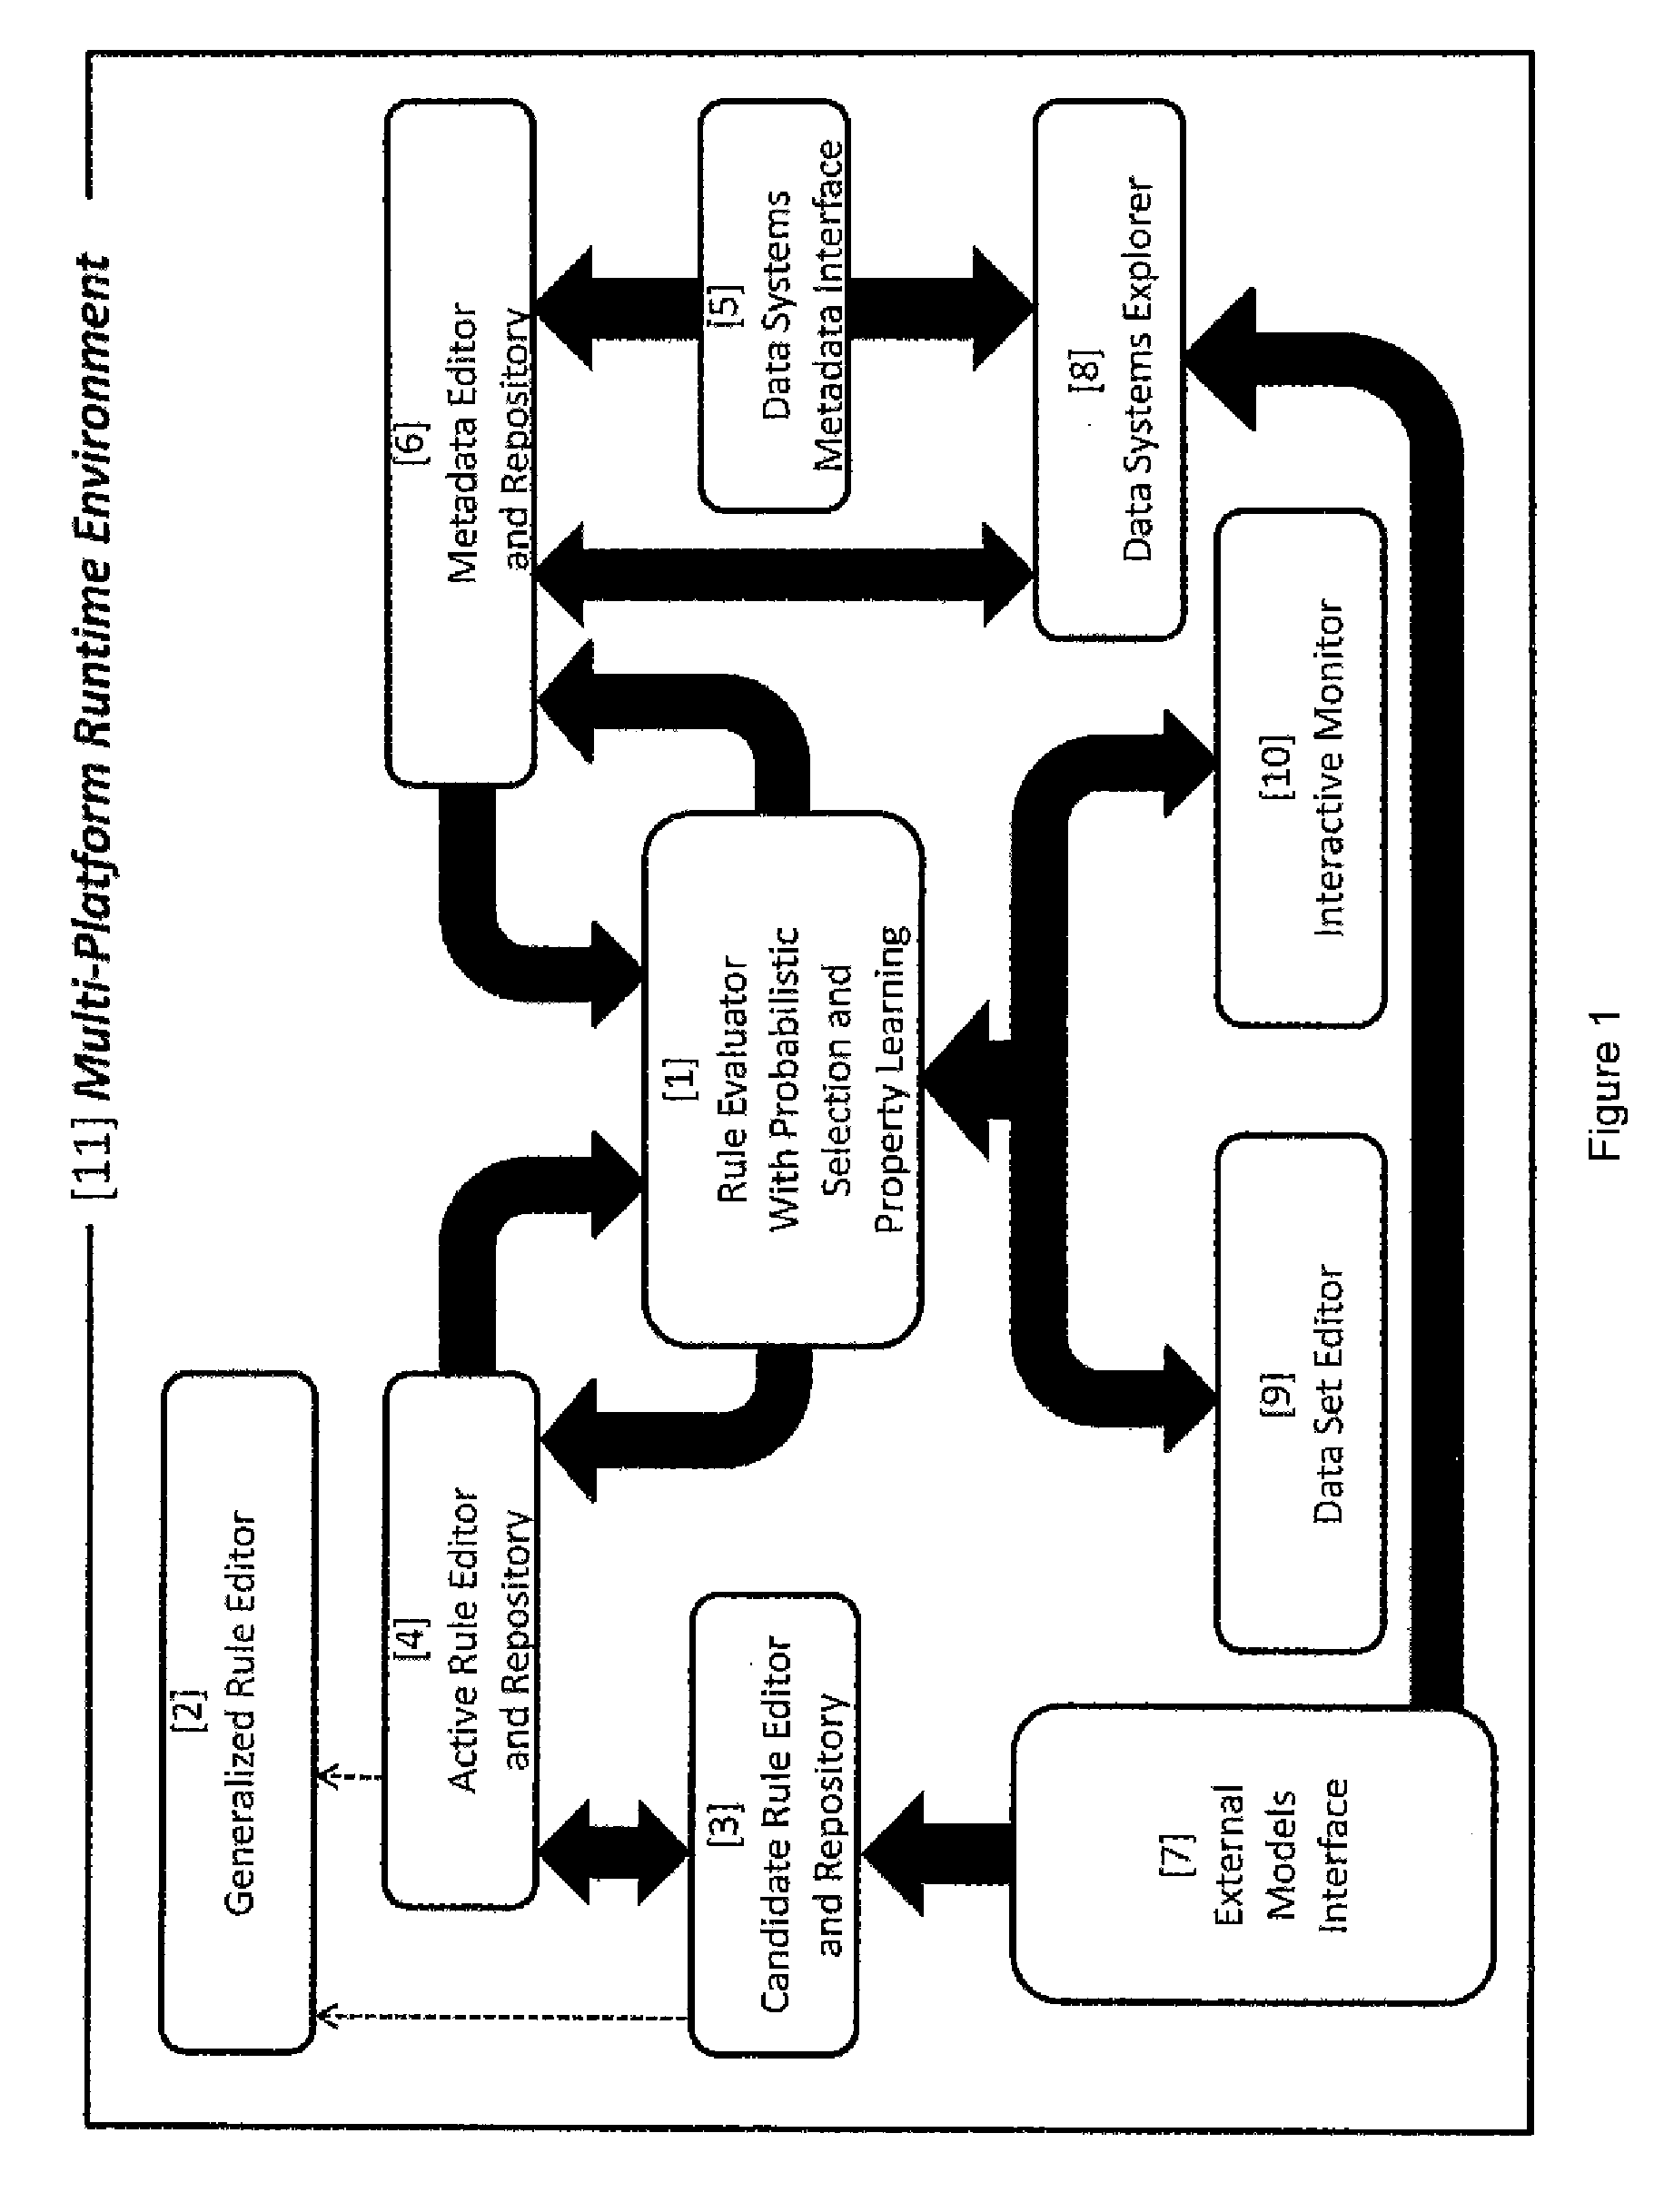 System and method for obfuscation of data across an enterprise